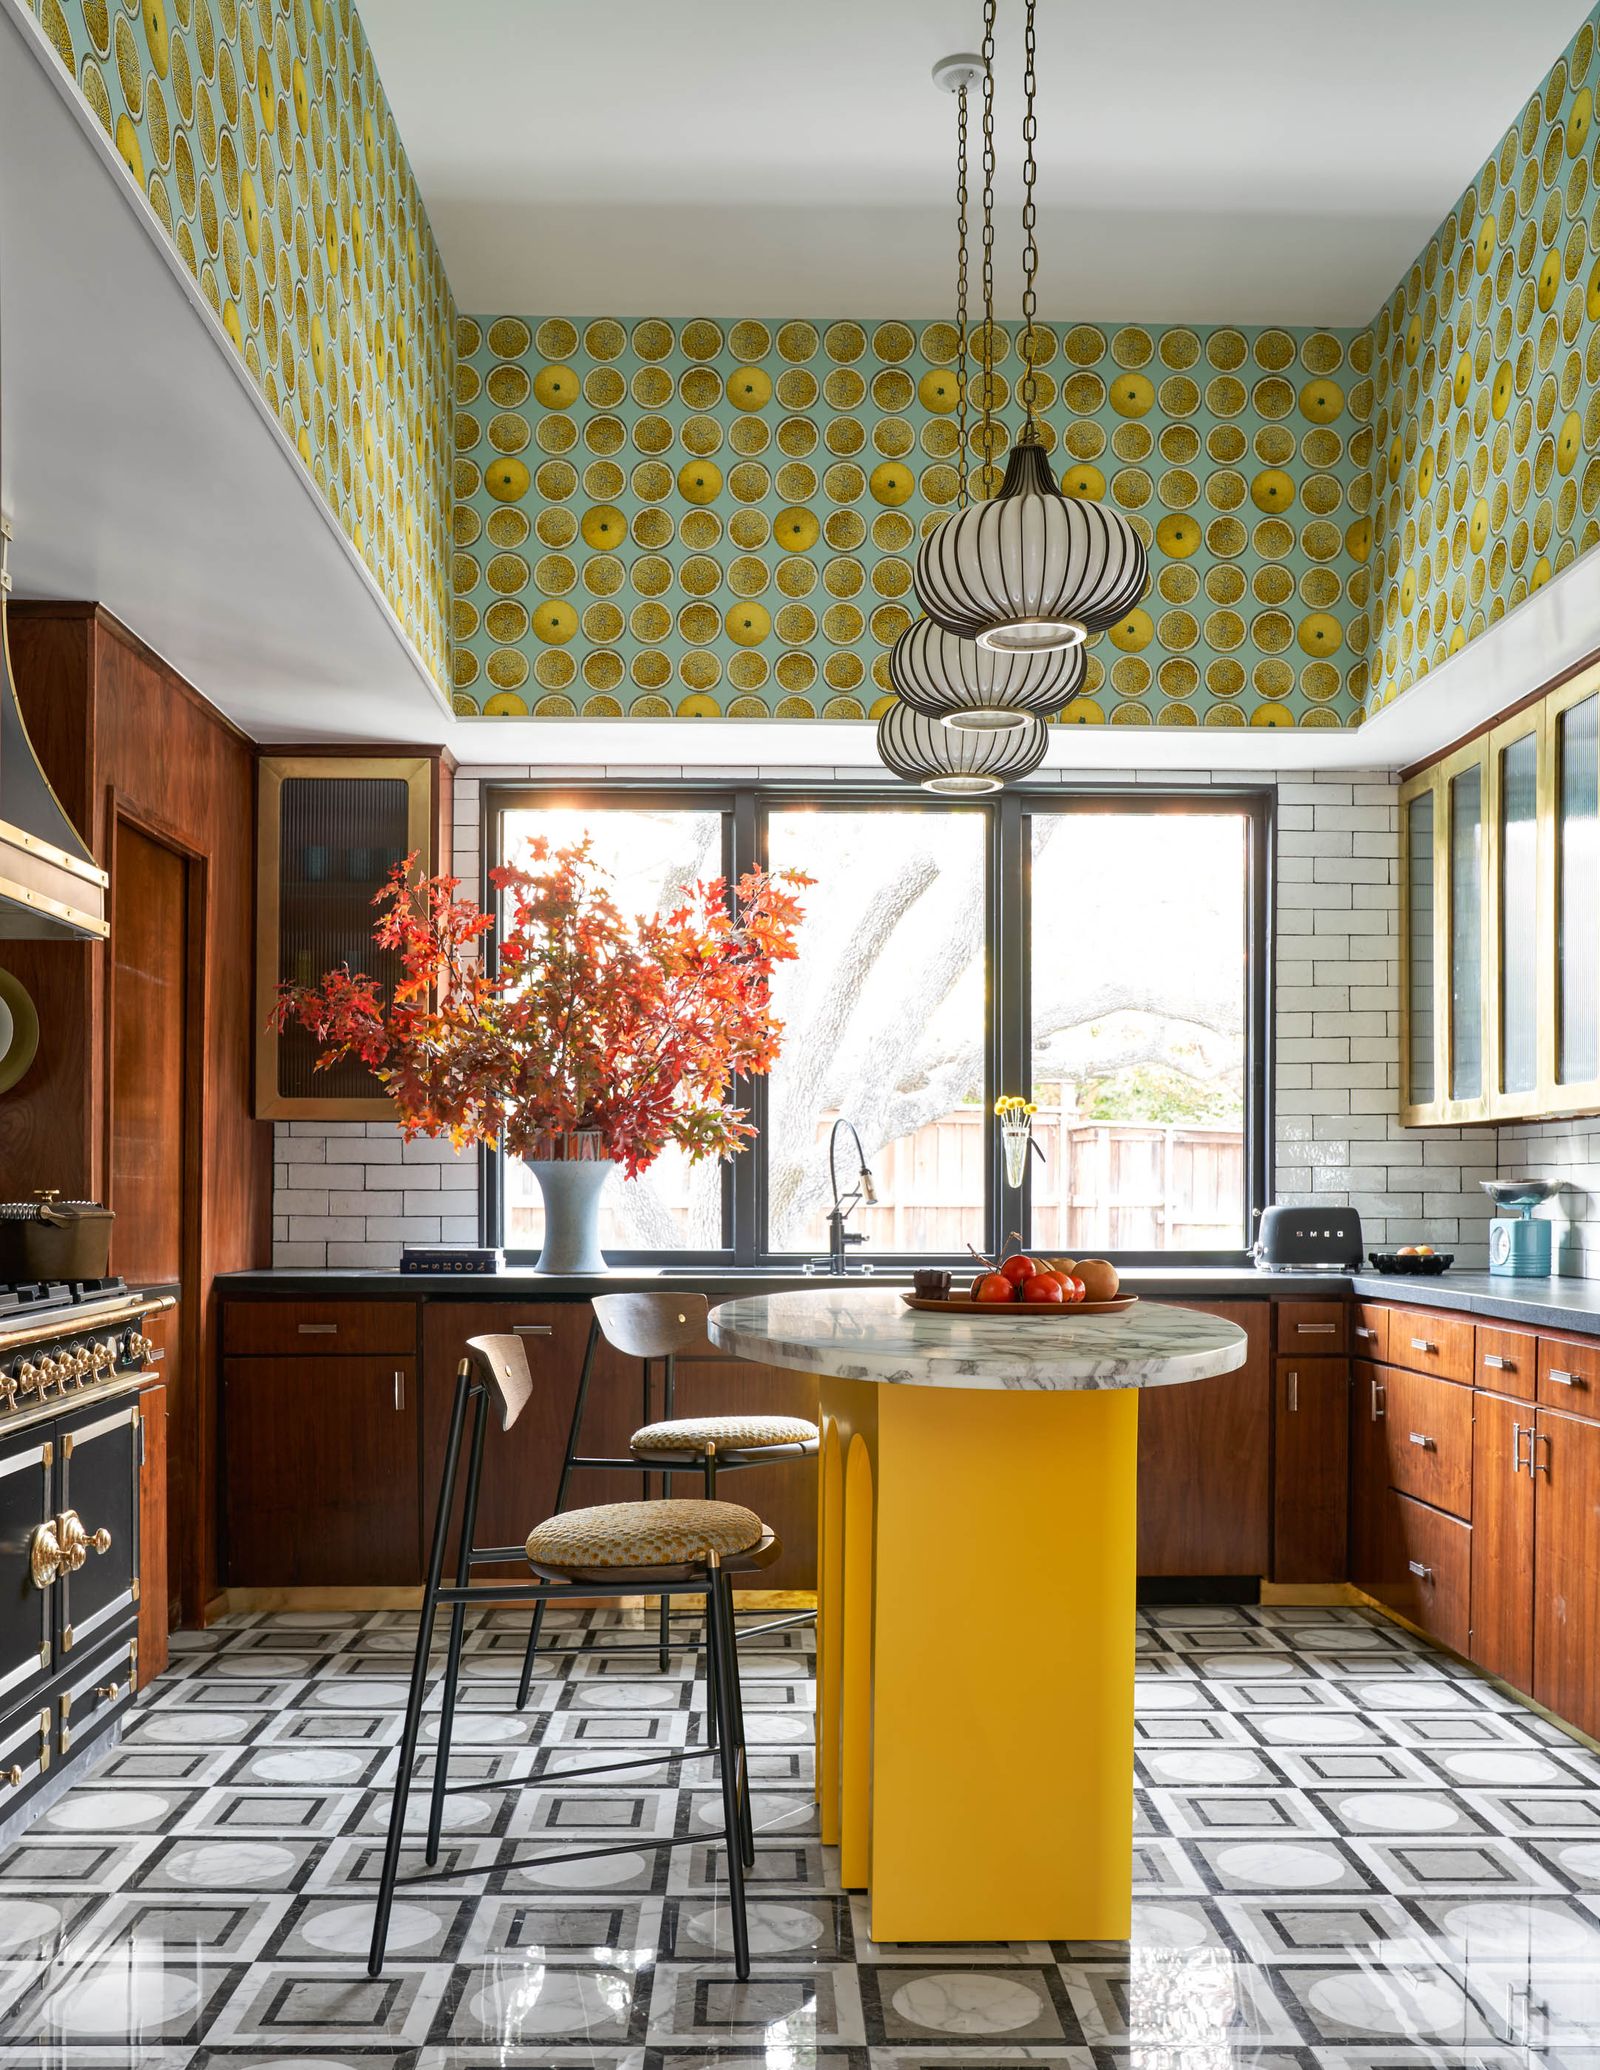 Kitchen wallpaper ideas – how to add instant color and pattern to your ...